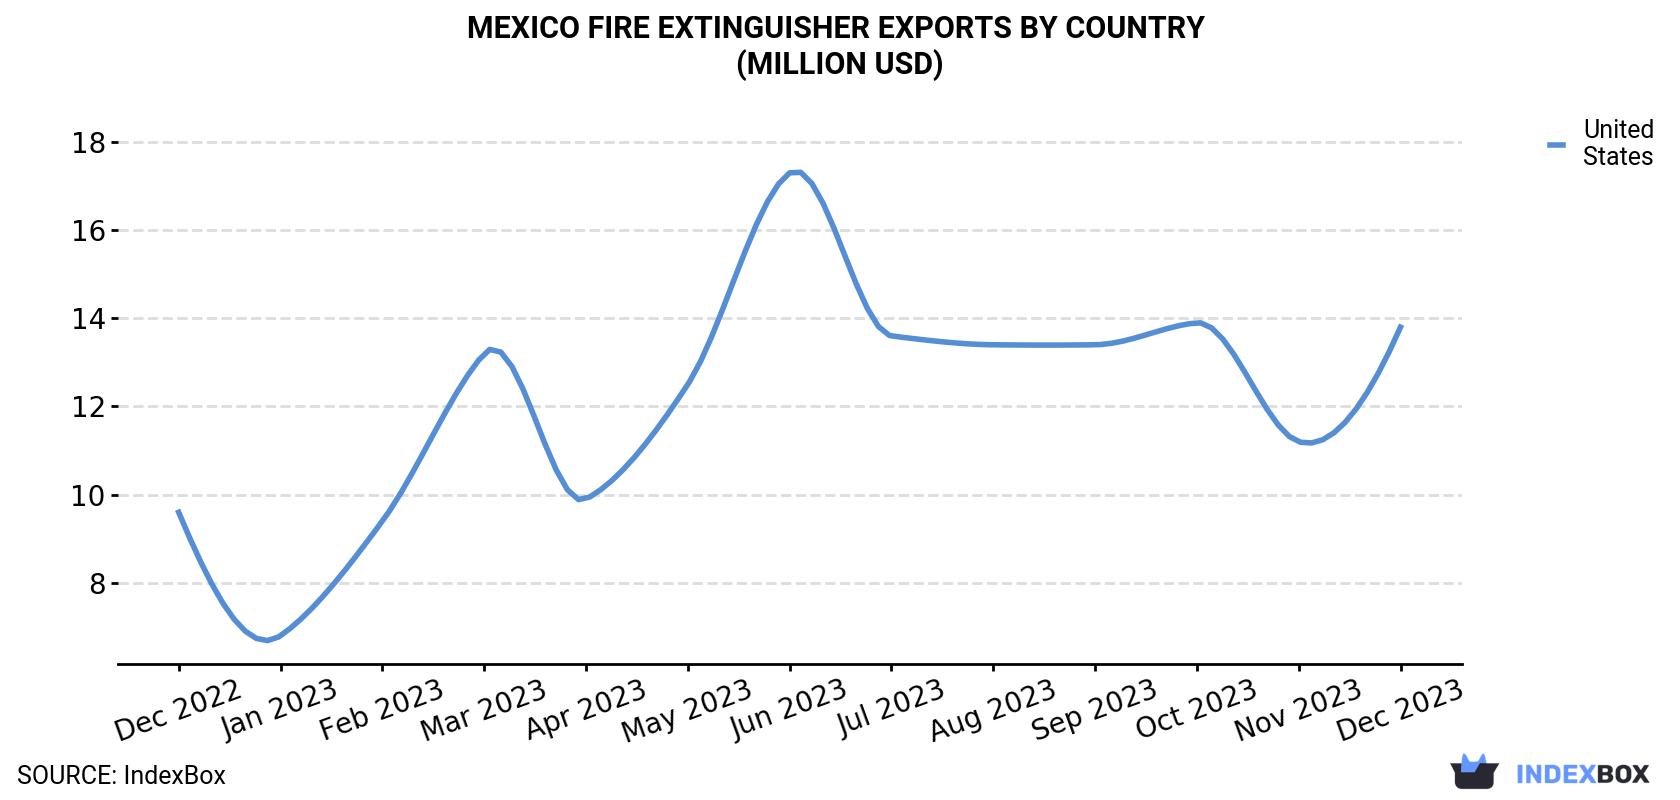 Mexico Fire Extinguisher Exports By Country (Million USD)